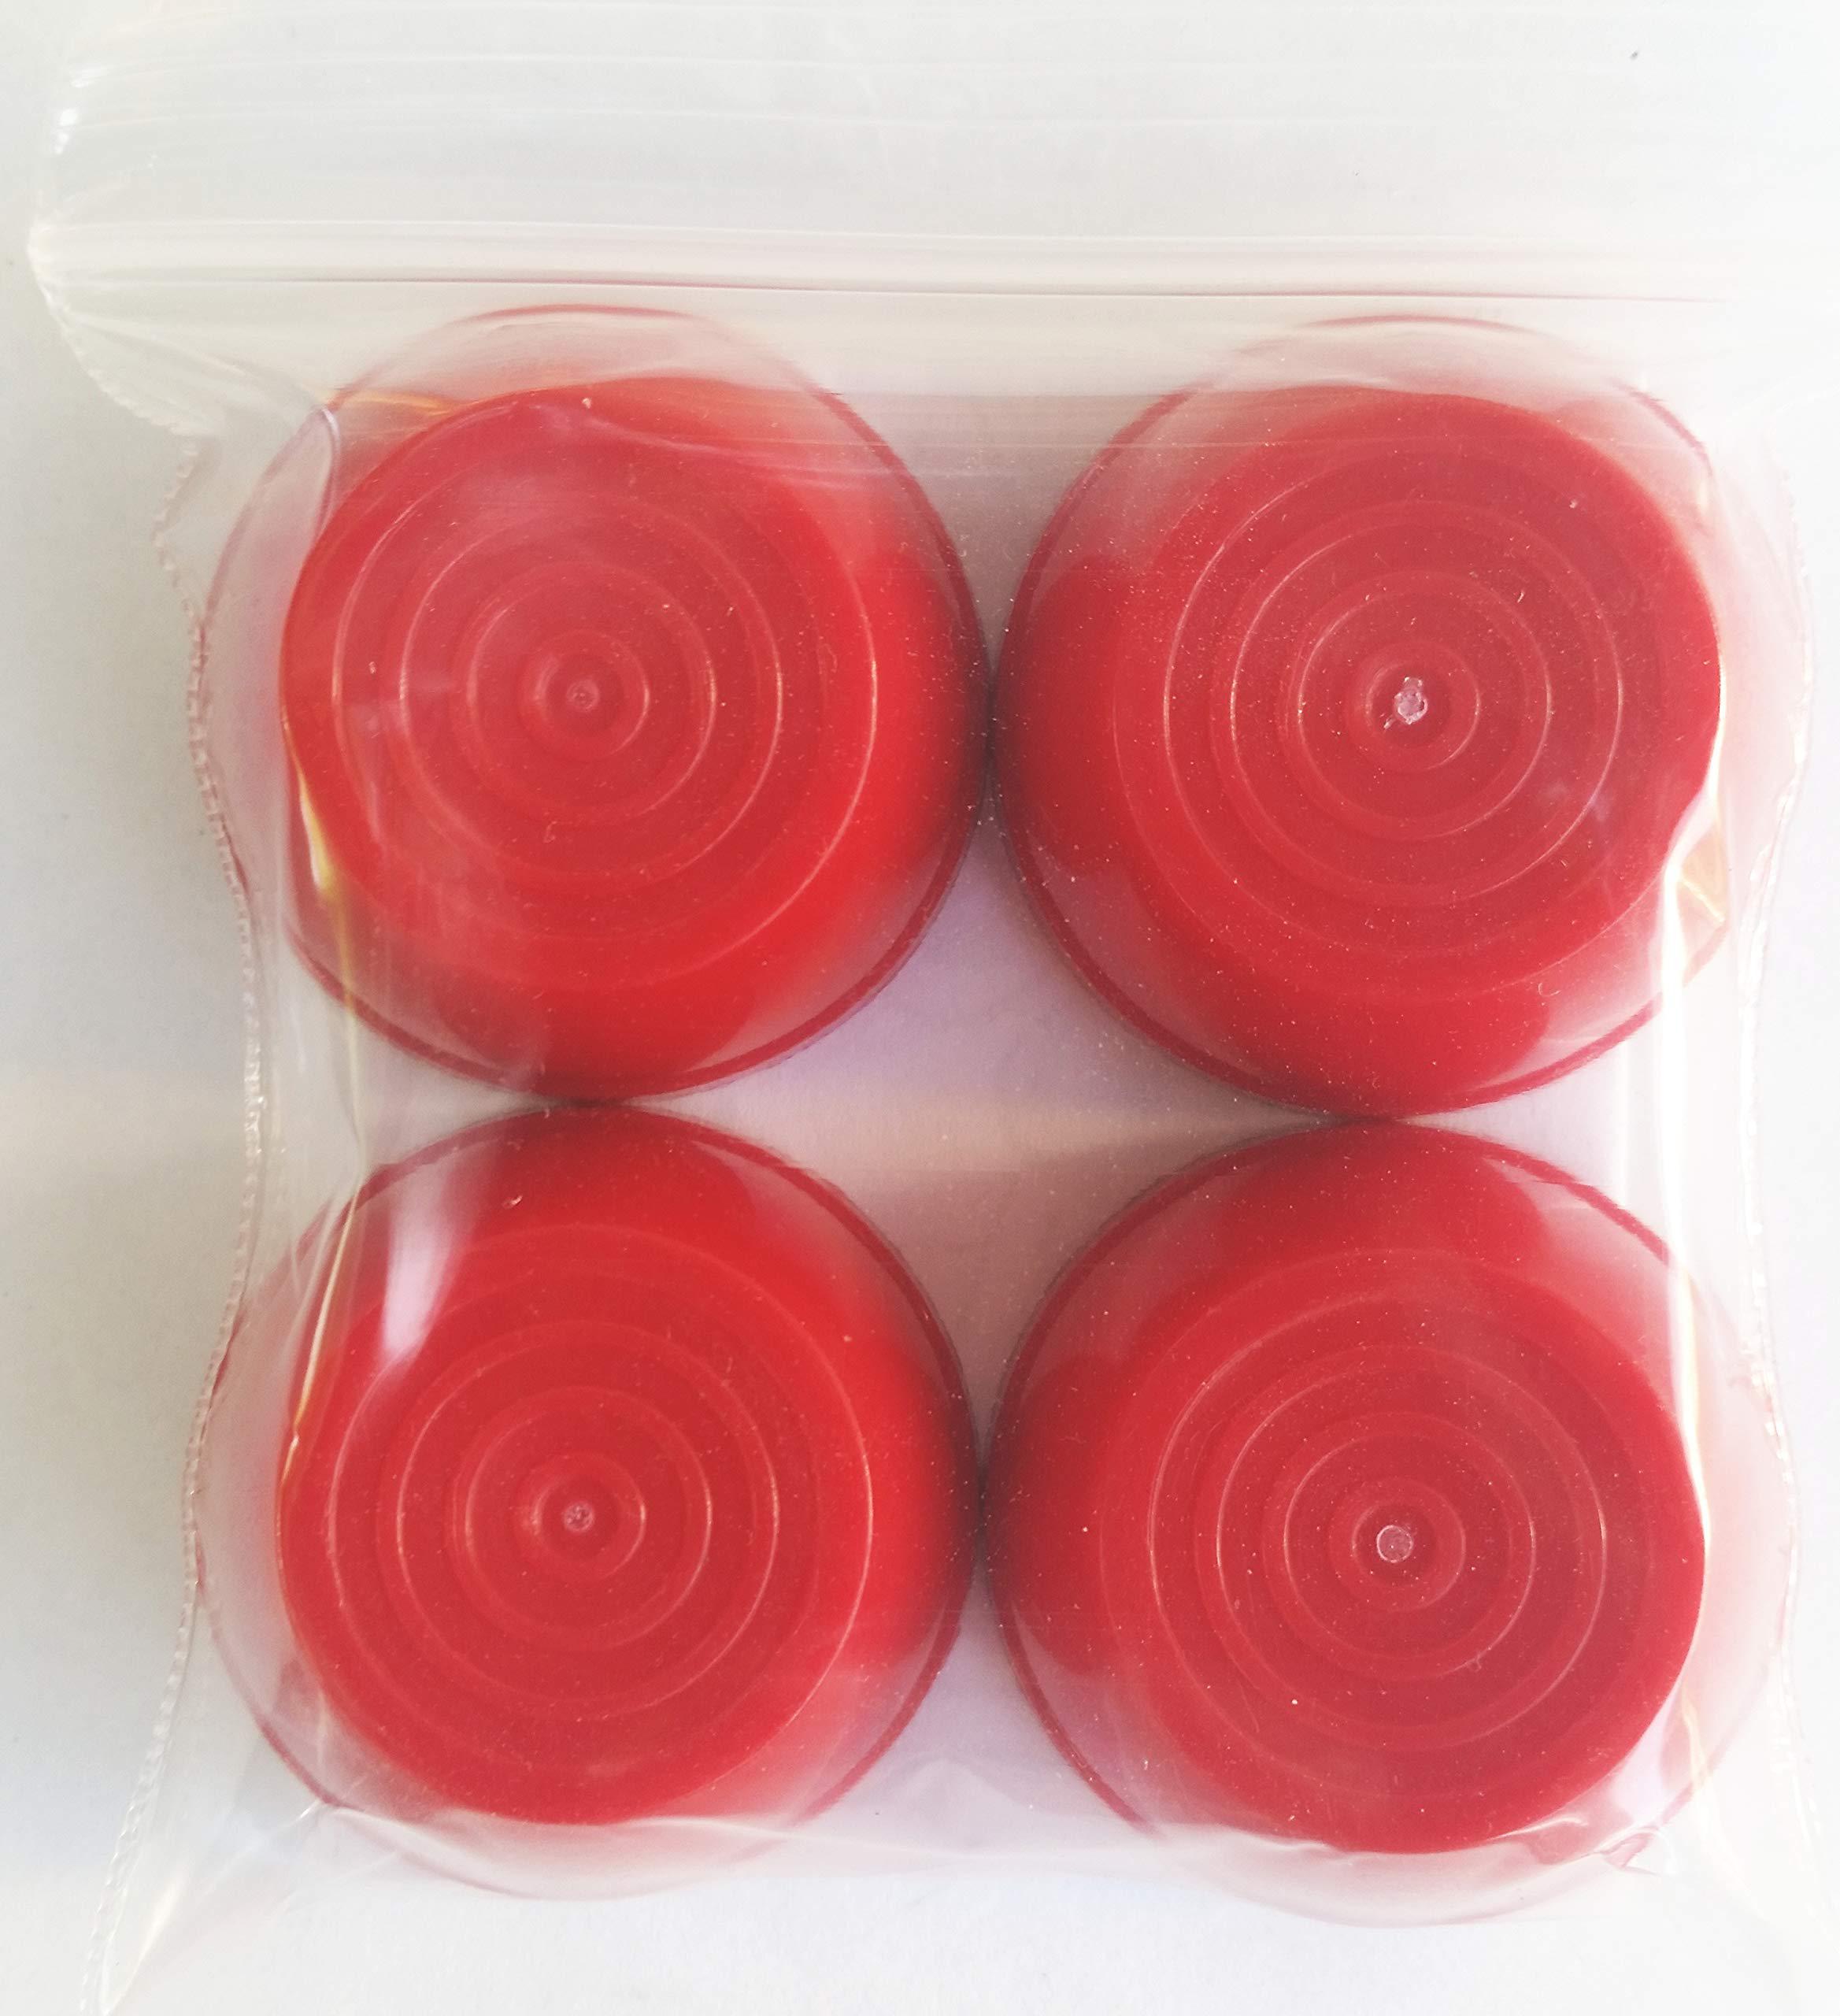 quadrapoint hub cap compatible with popular red wagon brand plastic & folding wagons 7/16" red (not for wood or steel wagons)